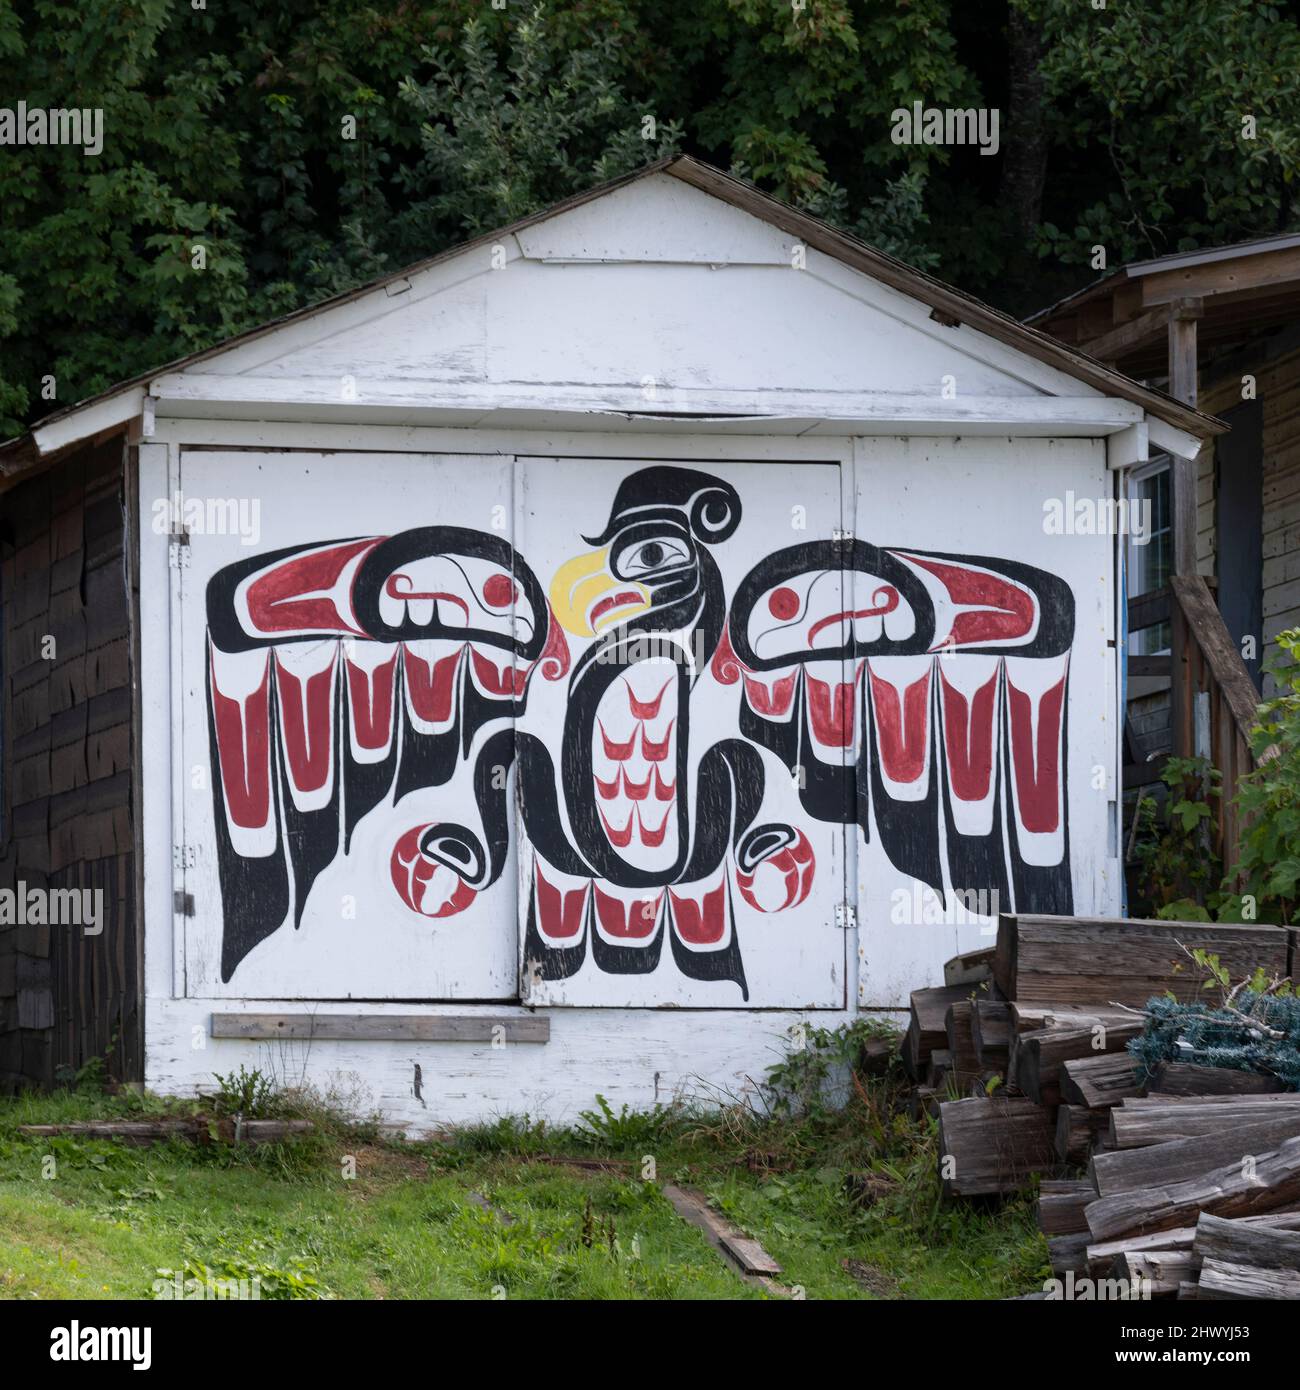 Indigenous Artwork on the exterior wall of a building in Alert Bay on Cormorant Island, Johnstone Strait, British Columbia, Vancouver Island, Canada Stock Photo